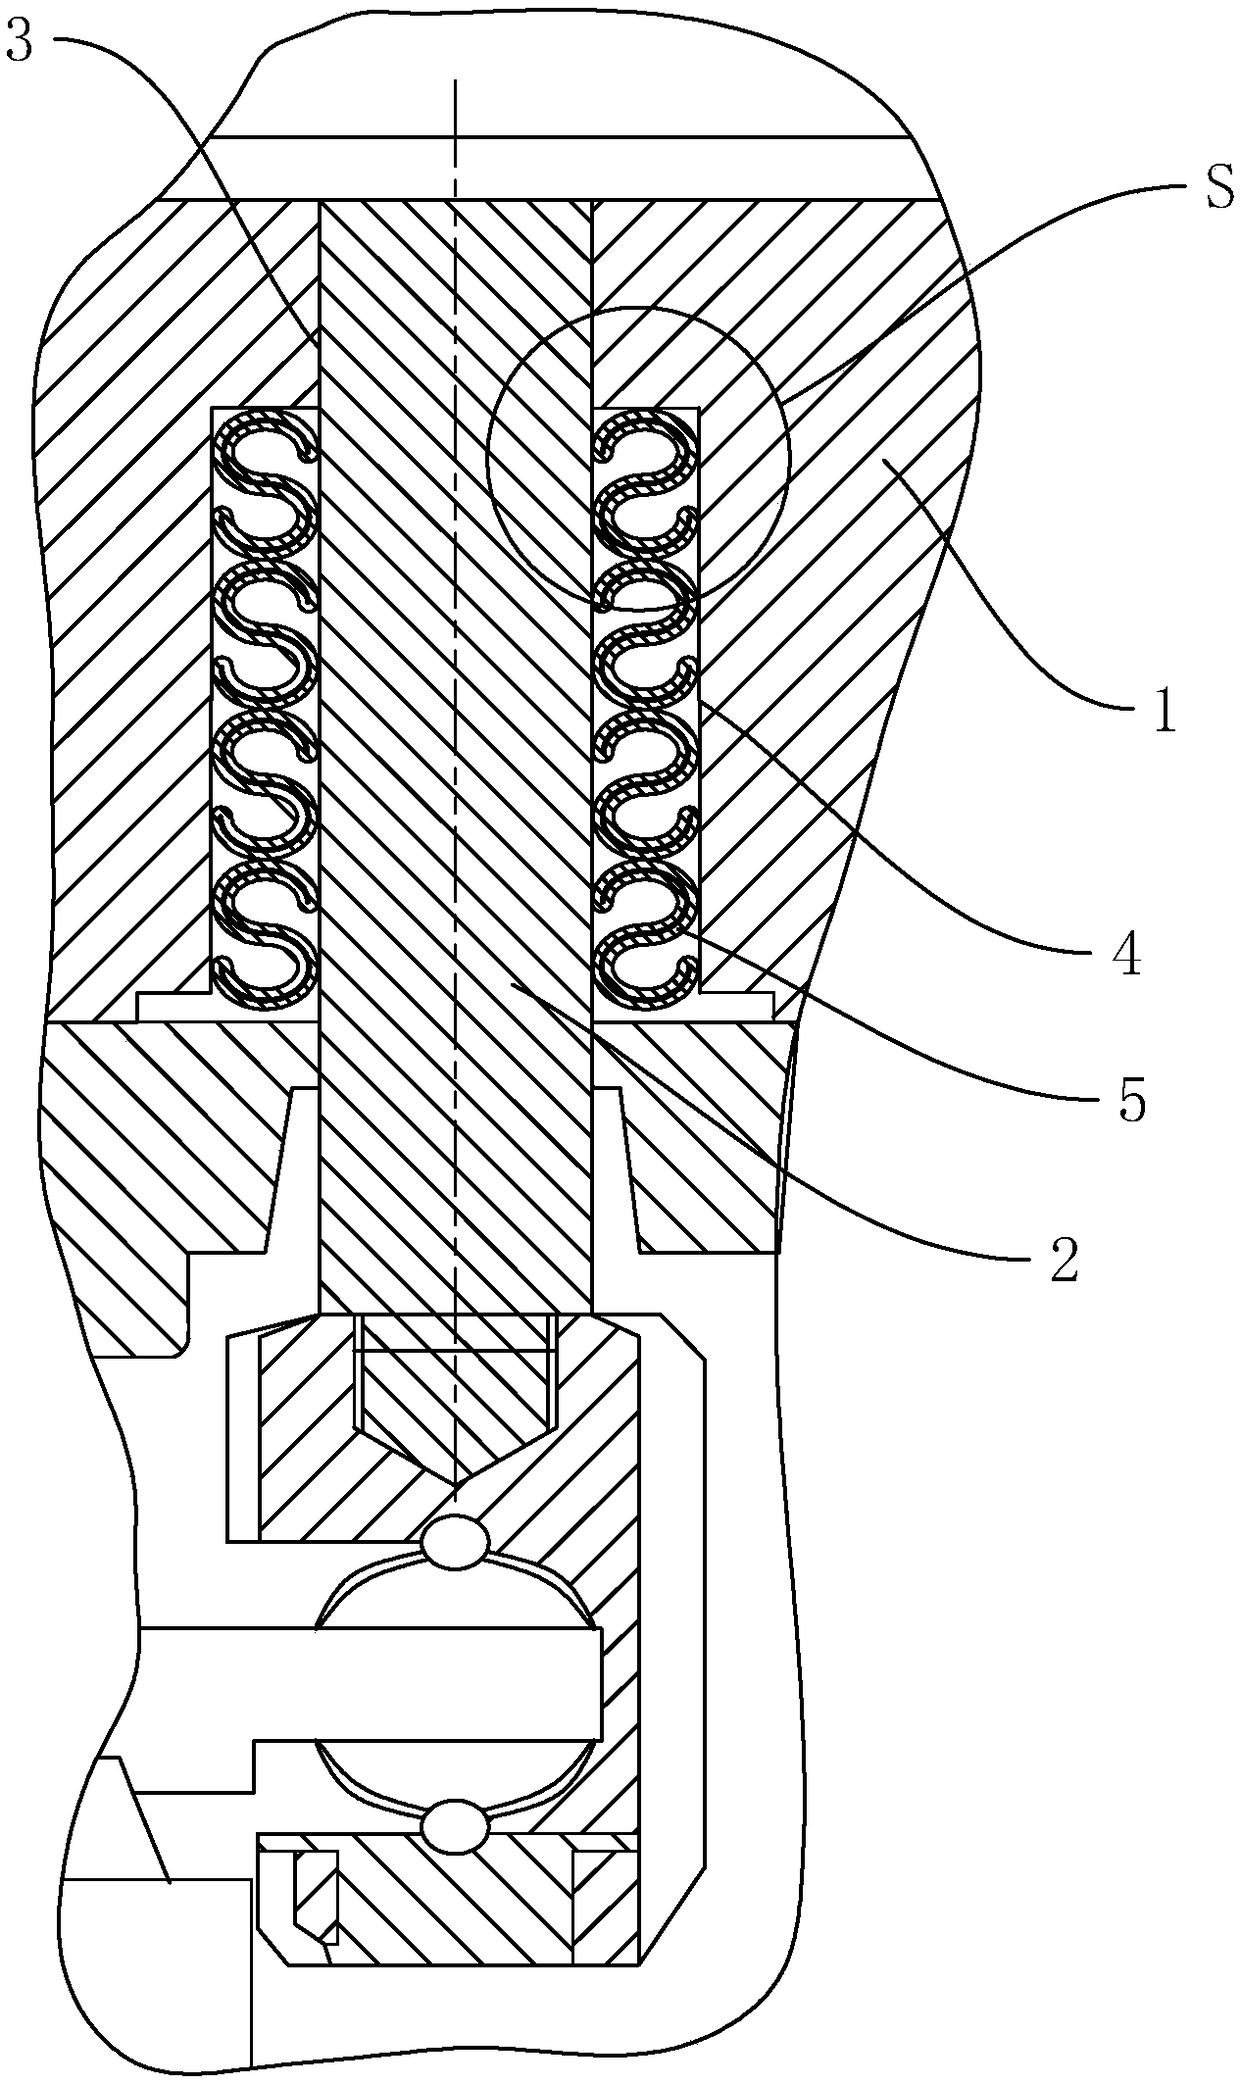 Sealing structure for compressor plunger